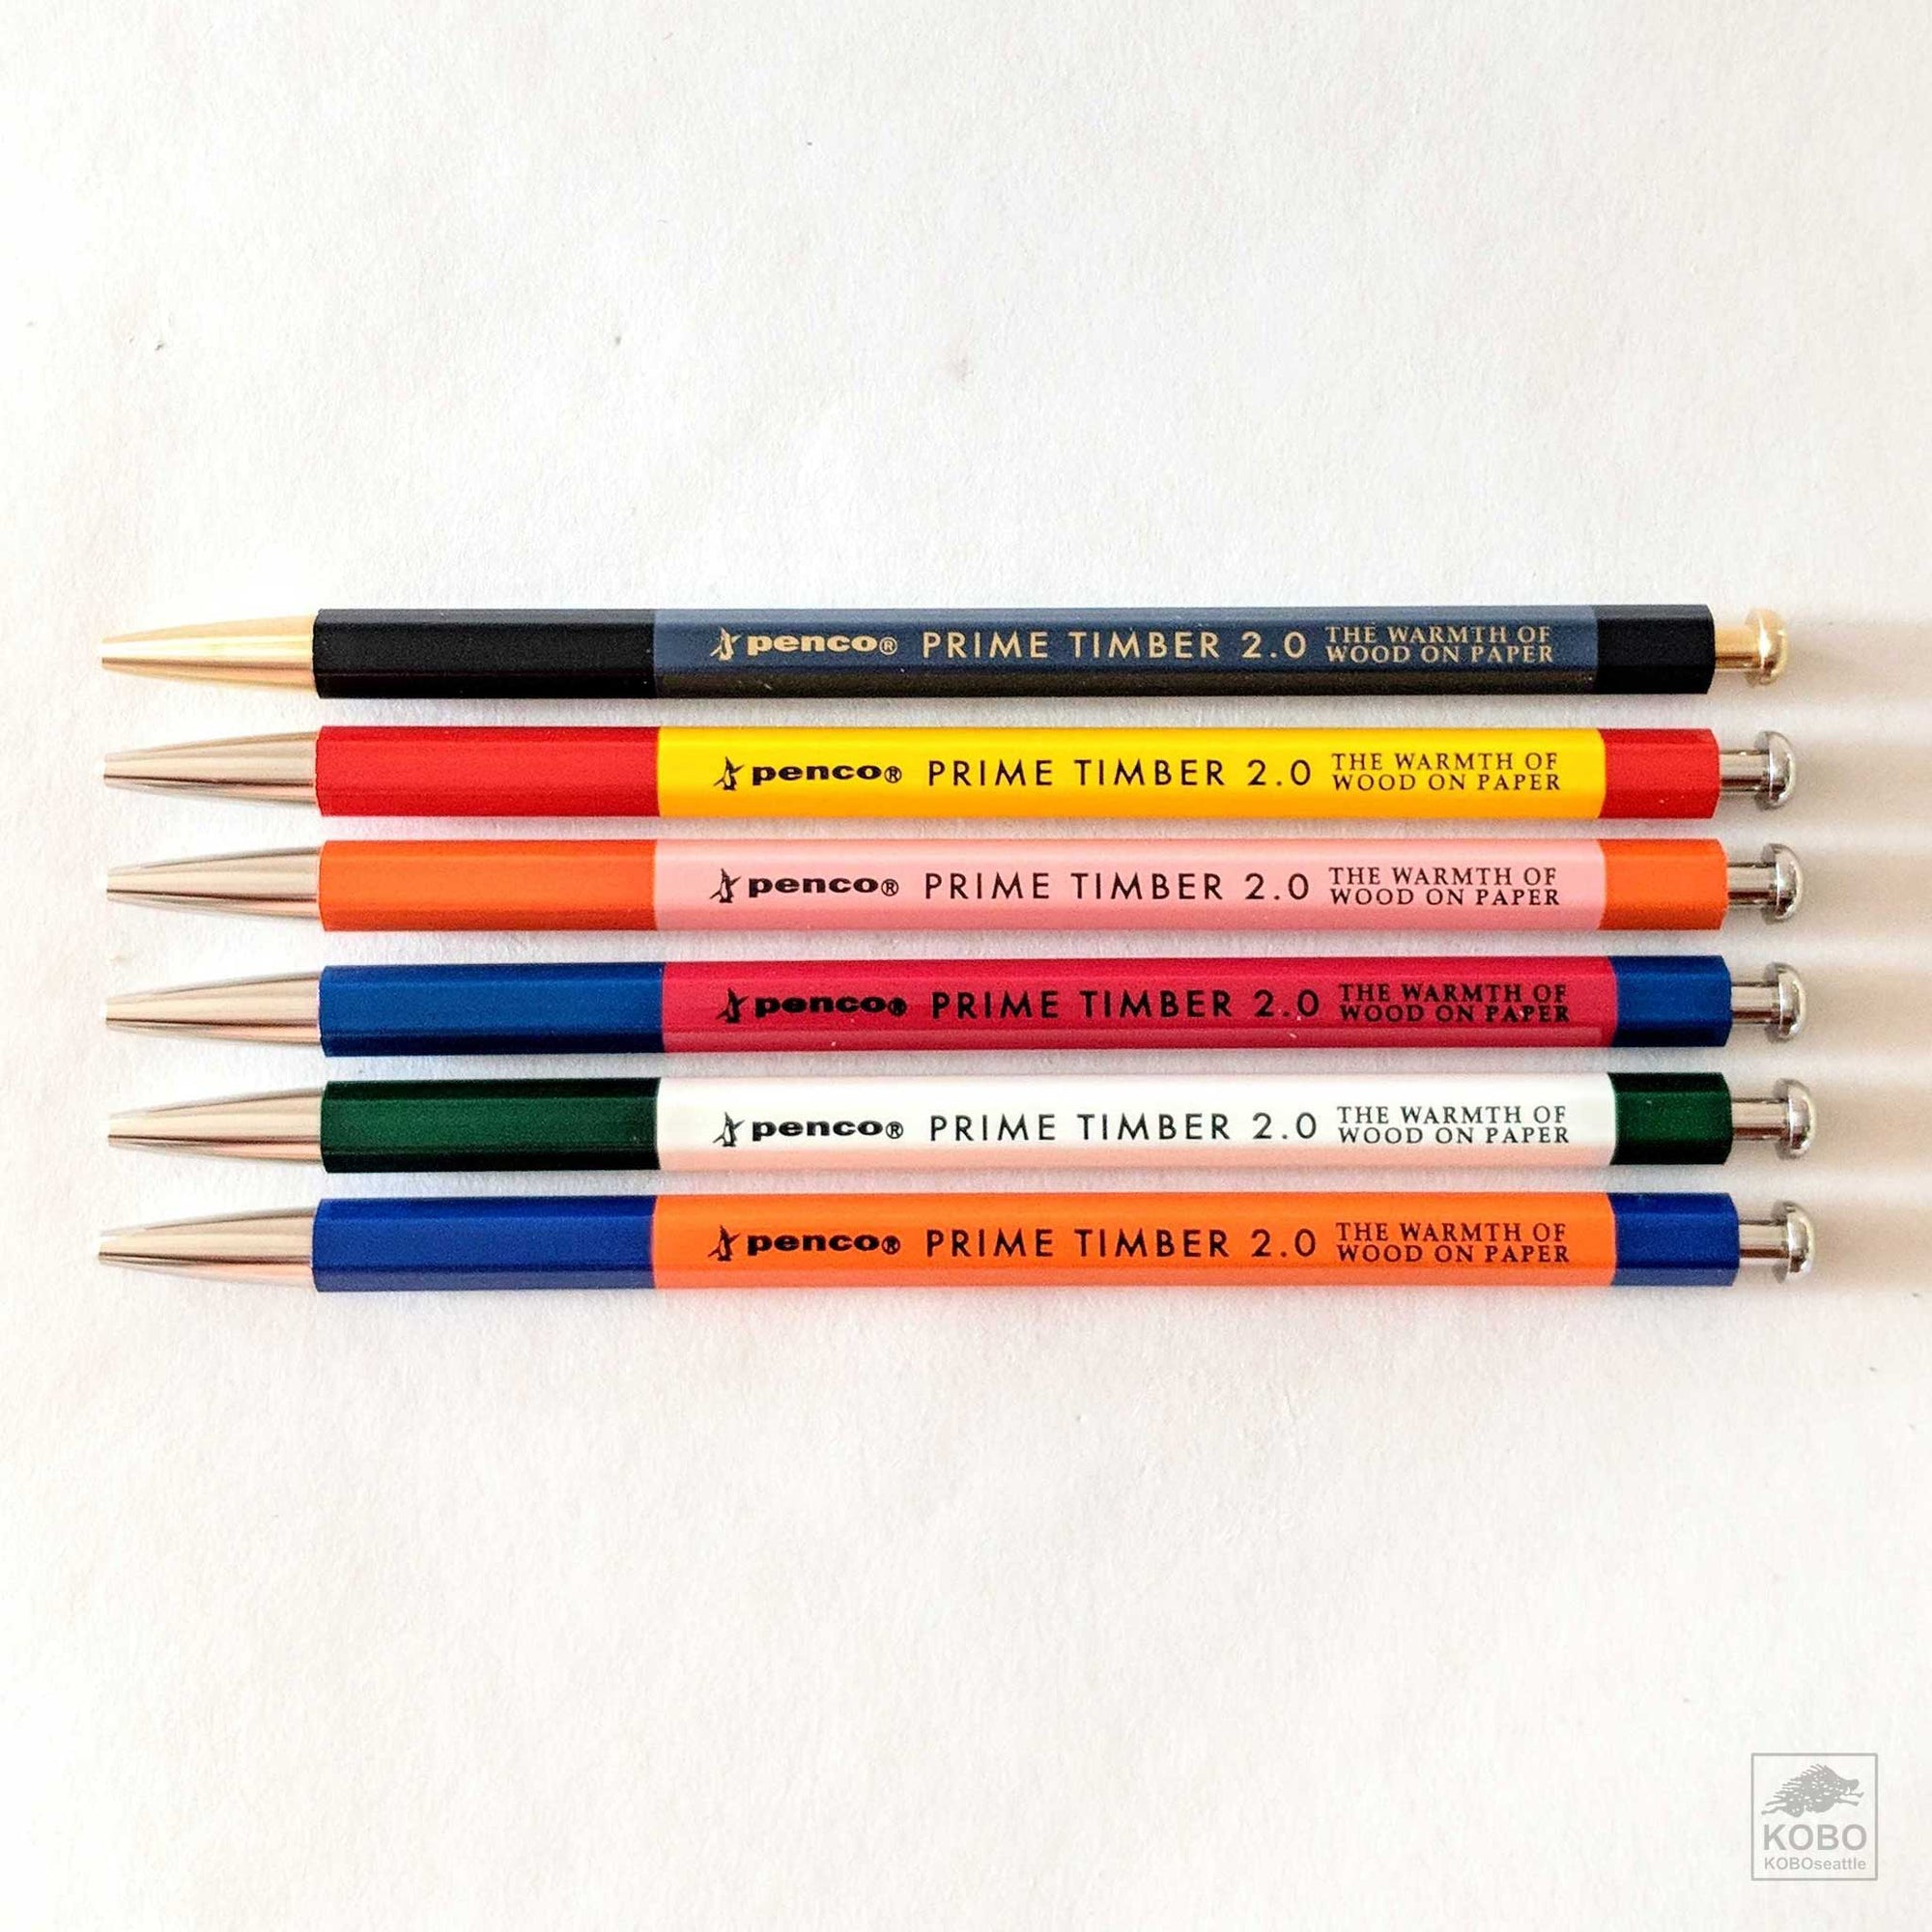 AMEICO - Official US Distributor of EGO.M - CENTO3 - Multifunction Art  Pencil